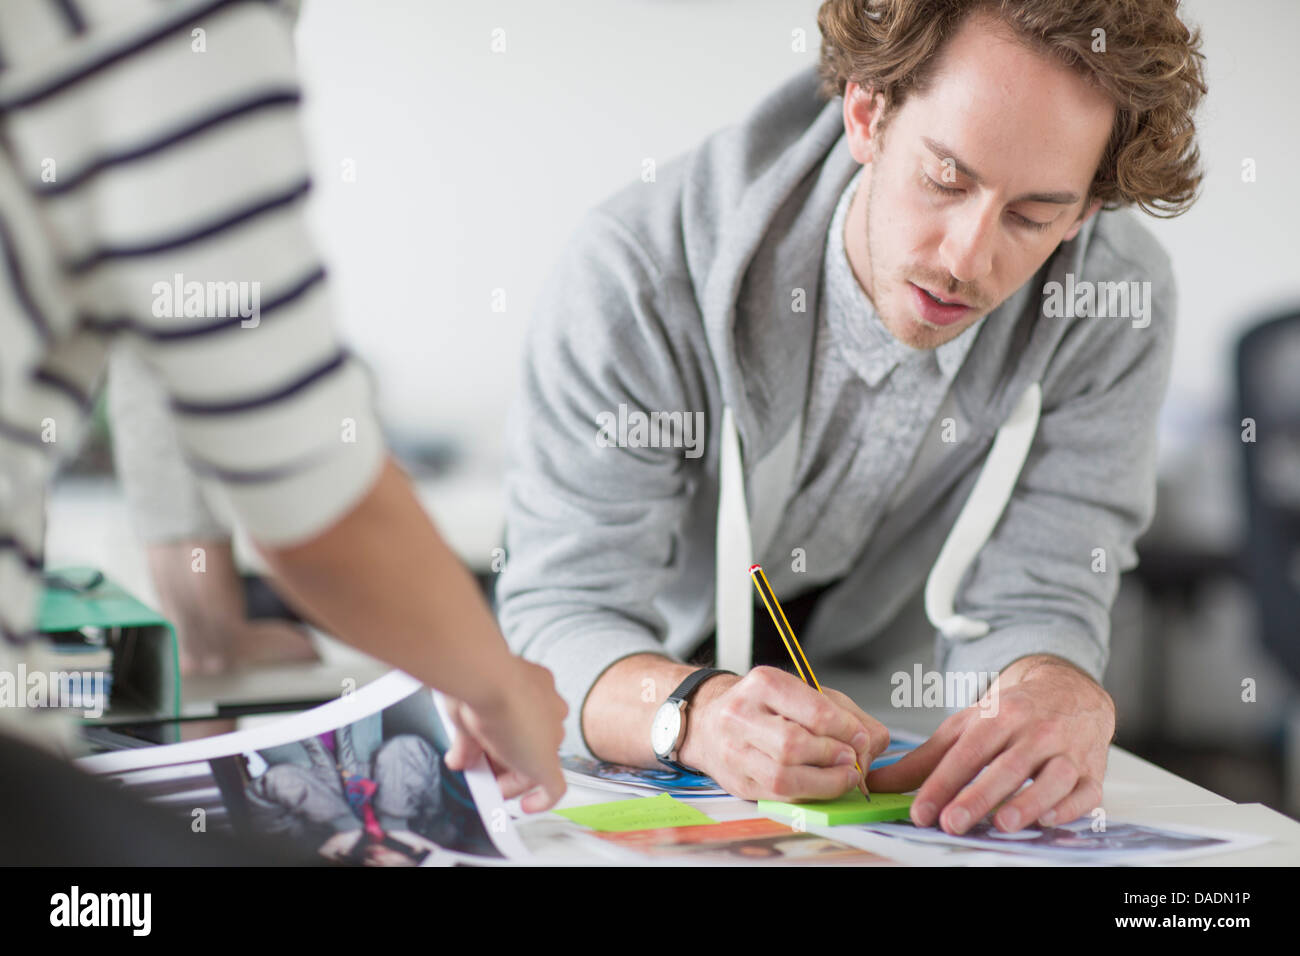 Young man making notes on desk in creative office Stock Photo